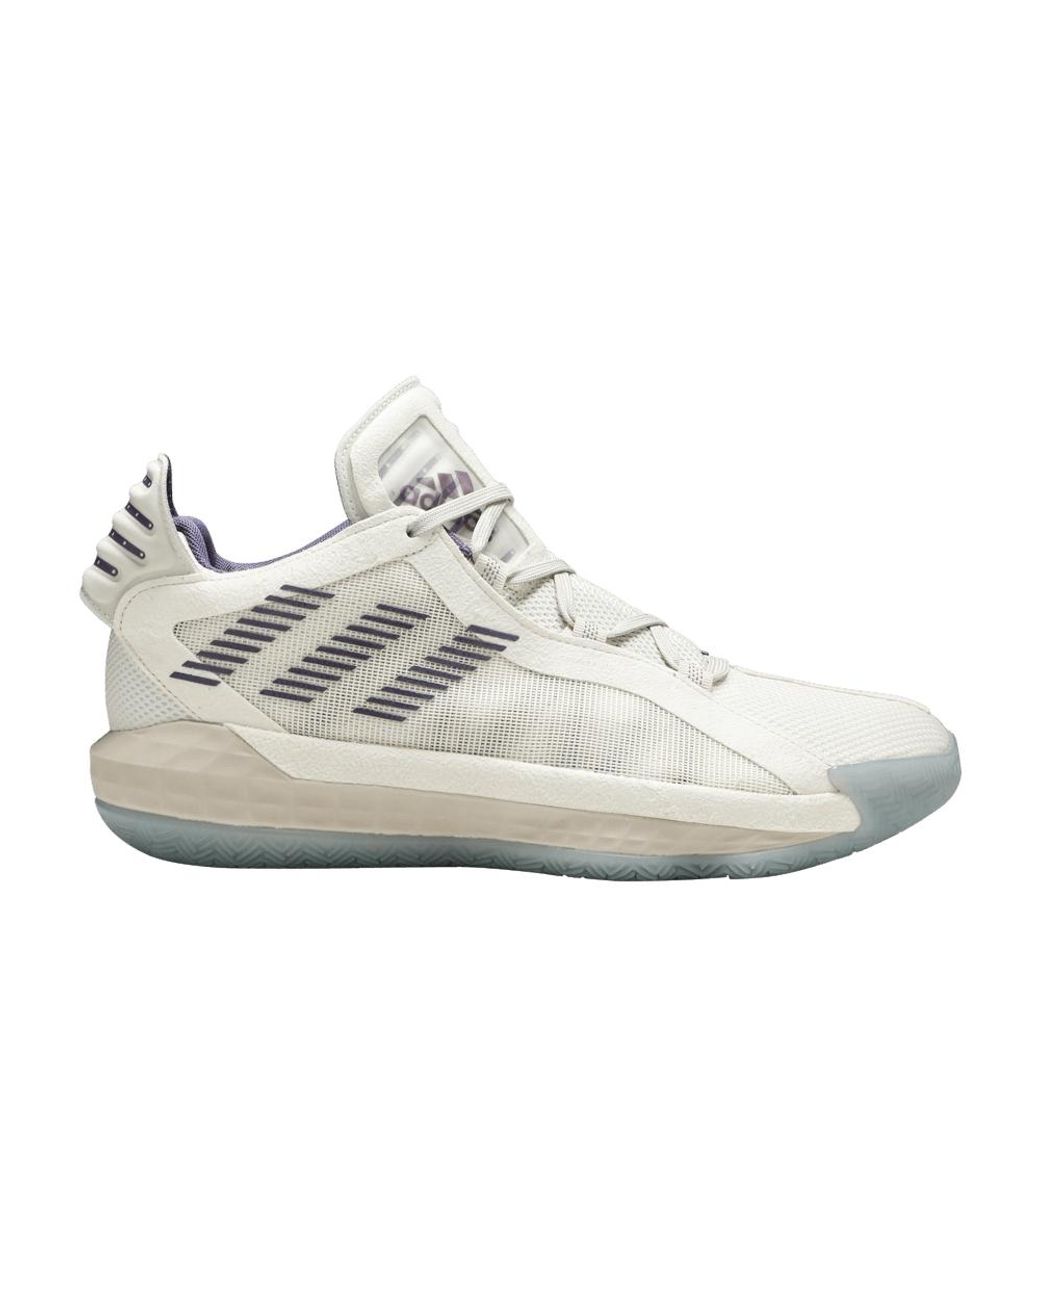 adidas Dame 6 in White for Men - Lyst